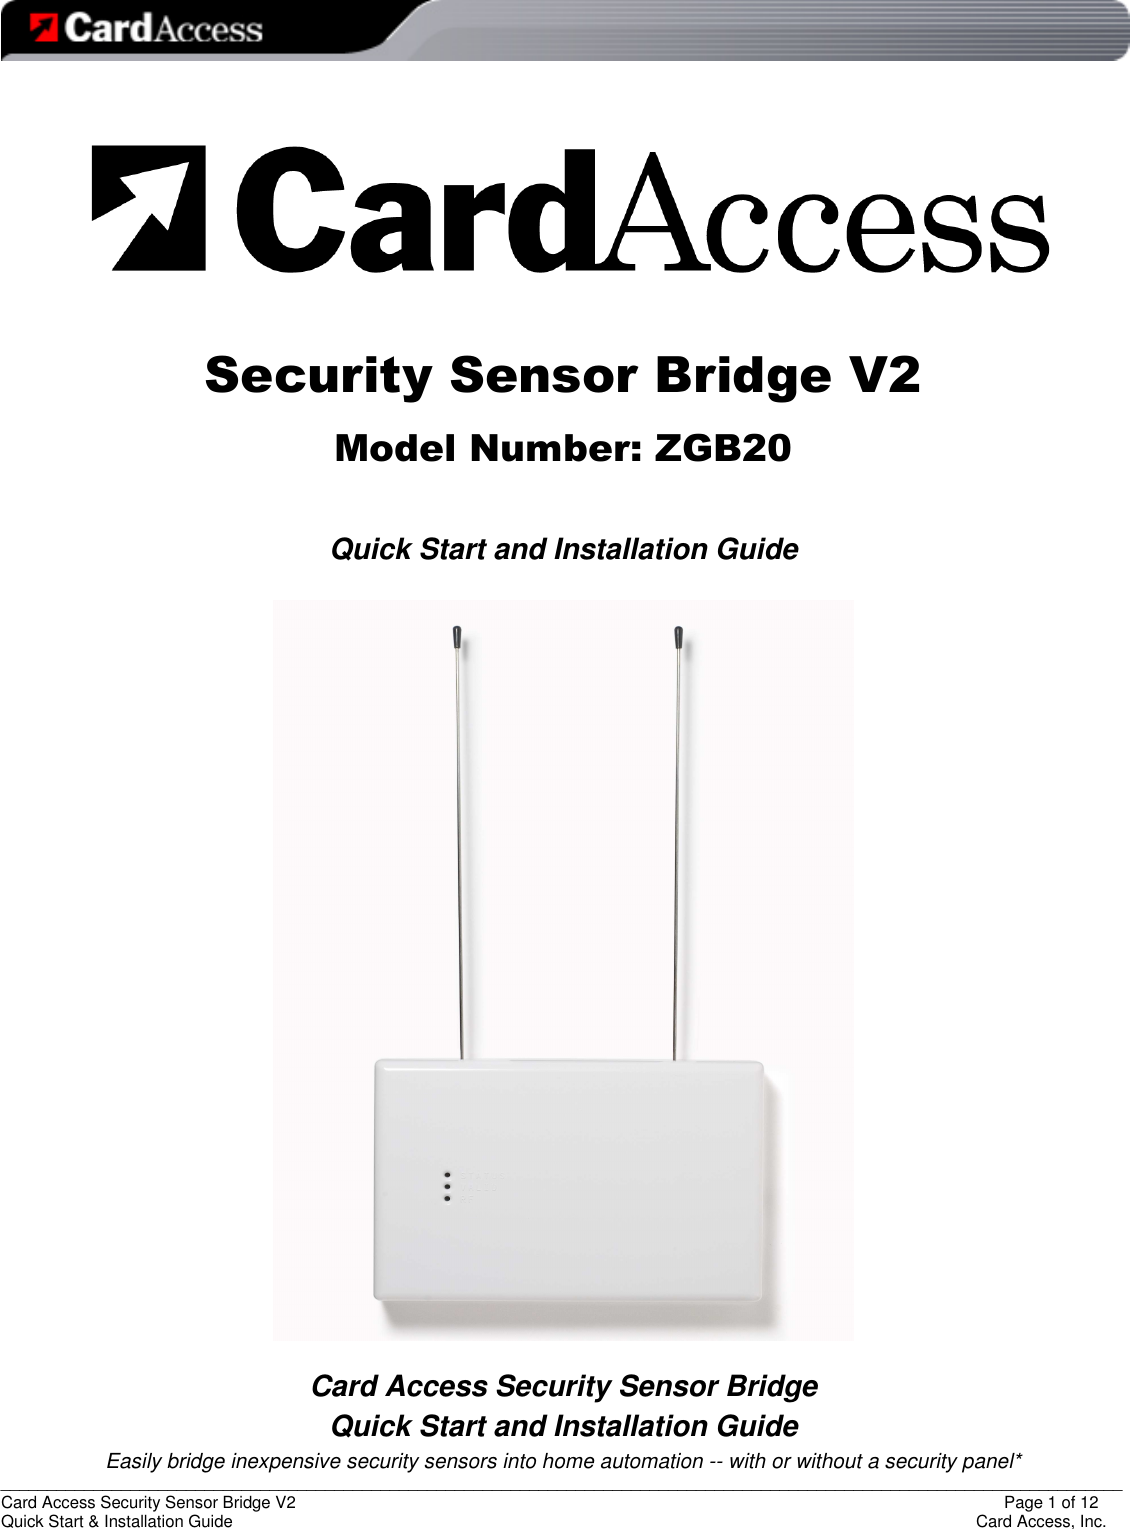   _________________________________________________________________________________________________________________________ Card Access Security Sensor Bridge V2                  Page 1 of 12 Quick Start &amp; Installation Guide      Card Access, Inc.    Security Sensor Bridge V2 Model Number: ZGB20  Quick Start and Installation Guide    Card Access Security Sensor Bridge Quick Start and Installation Guide Easily bridge inexpensive security sensors into home automation -- with or without a security panel* 